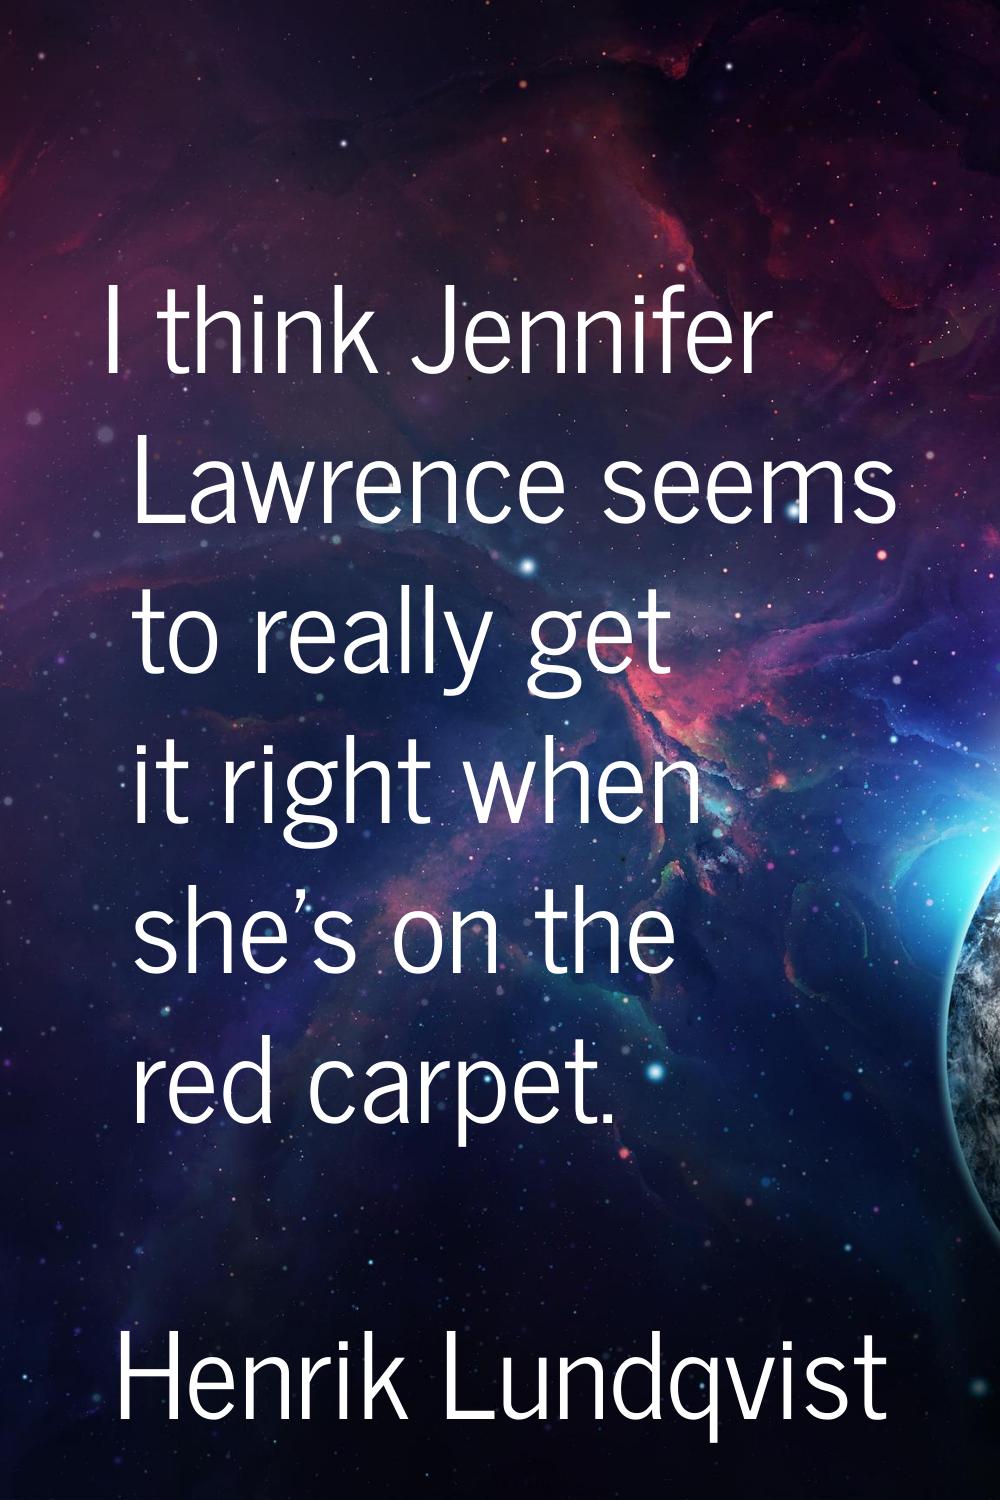 I think Jennifer Lawrence seems to really get it right when she's on the red carpet.